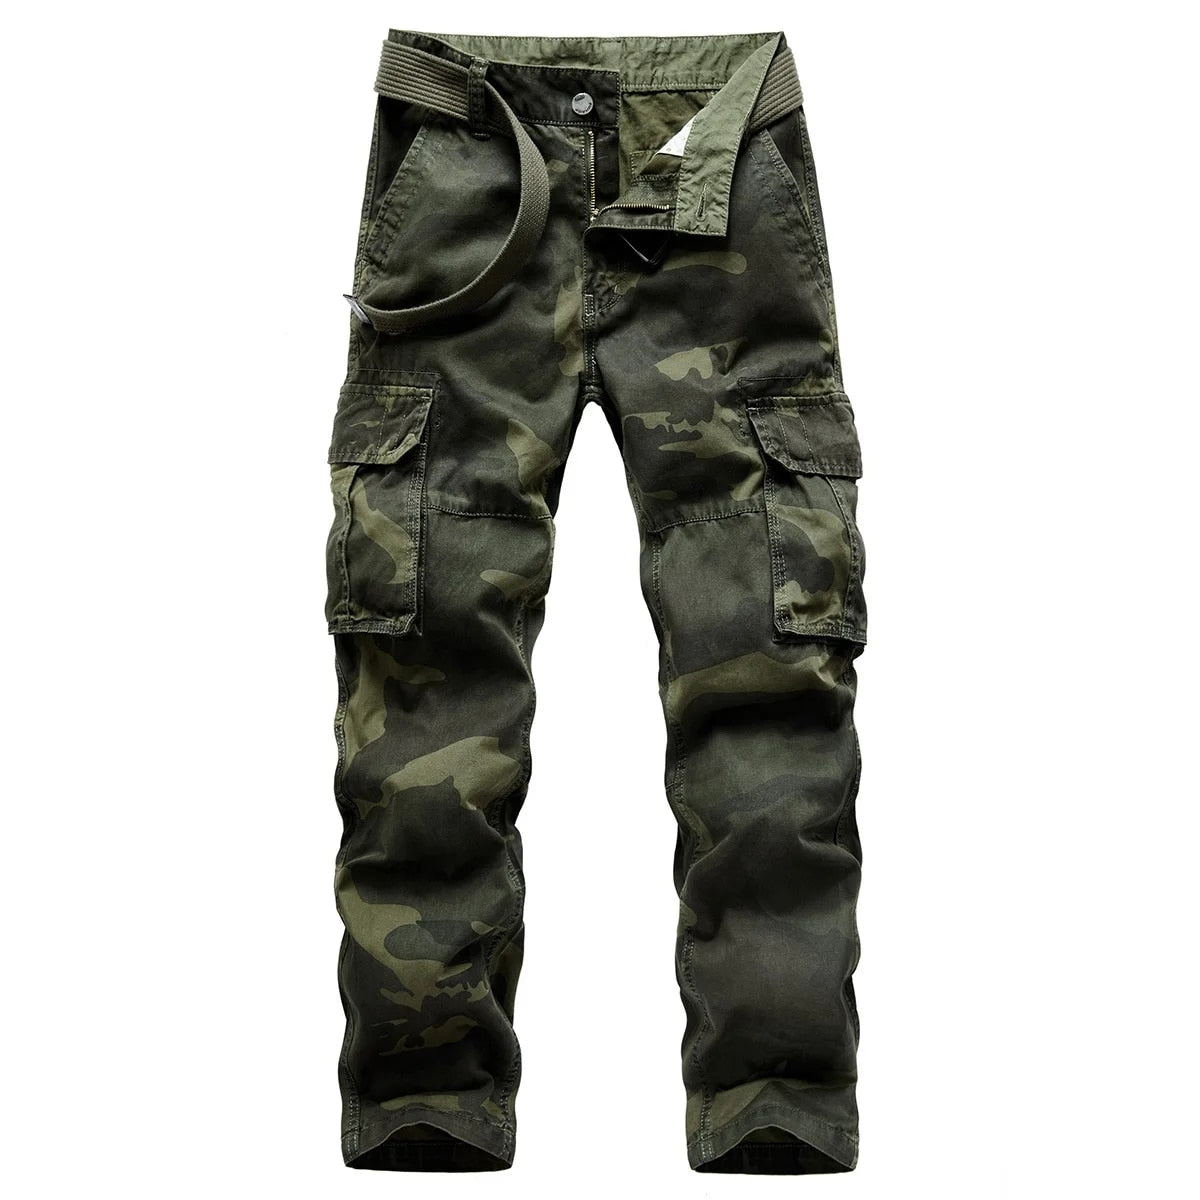 HIP HOP Streetwear Sport Spring Autumn Rock Camouflage Men'S Pocket Military Pants Fashions Casual Trouser 3716 2